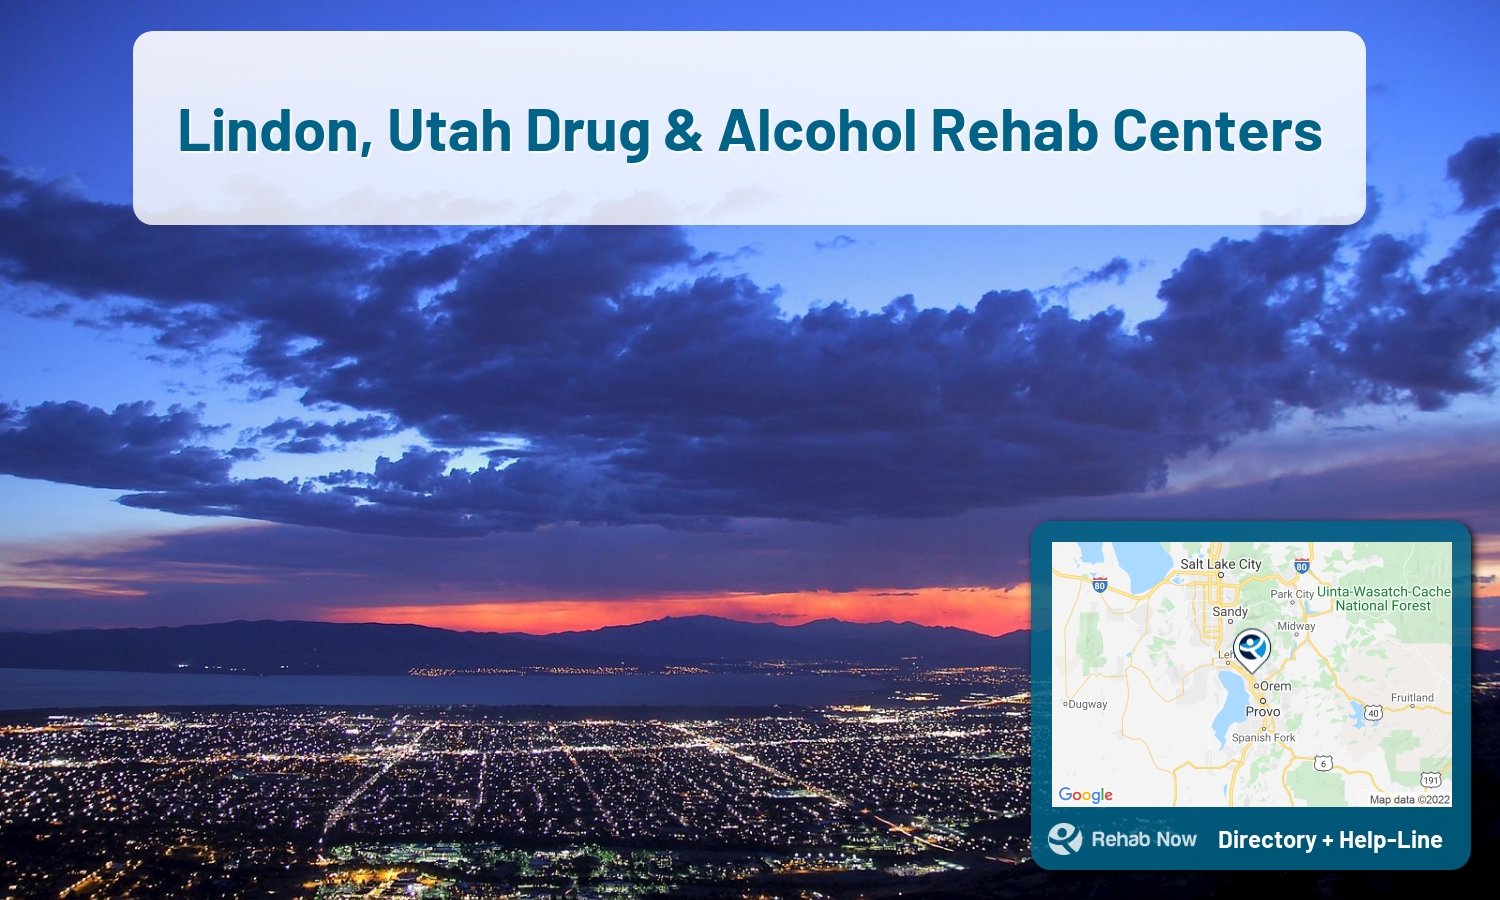 View options, availability, treatment methods, and more, for drug rehab and alcohol treatment in Lindon, Utah